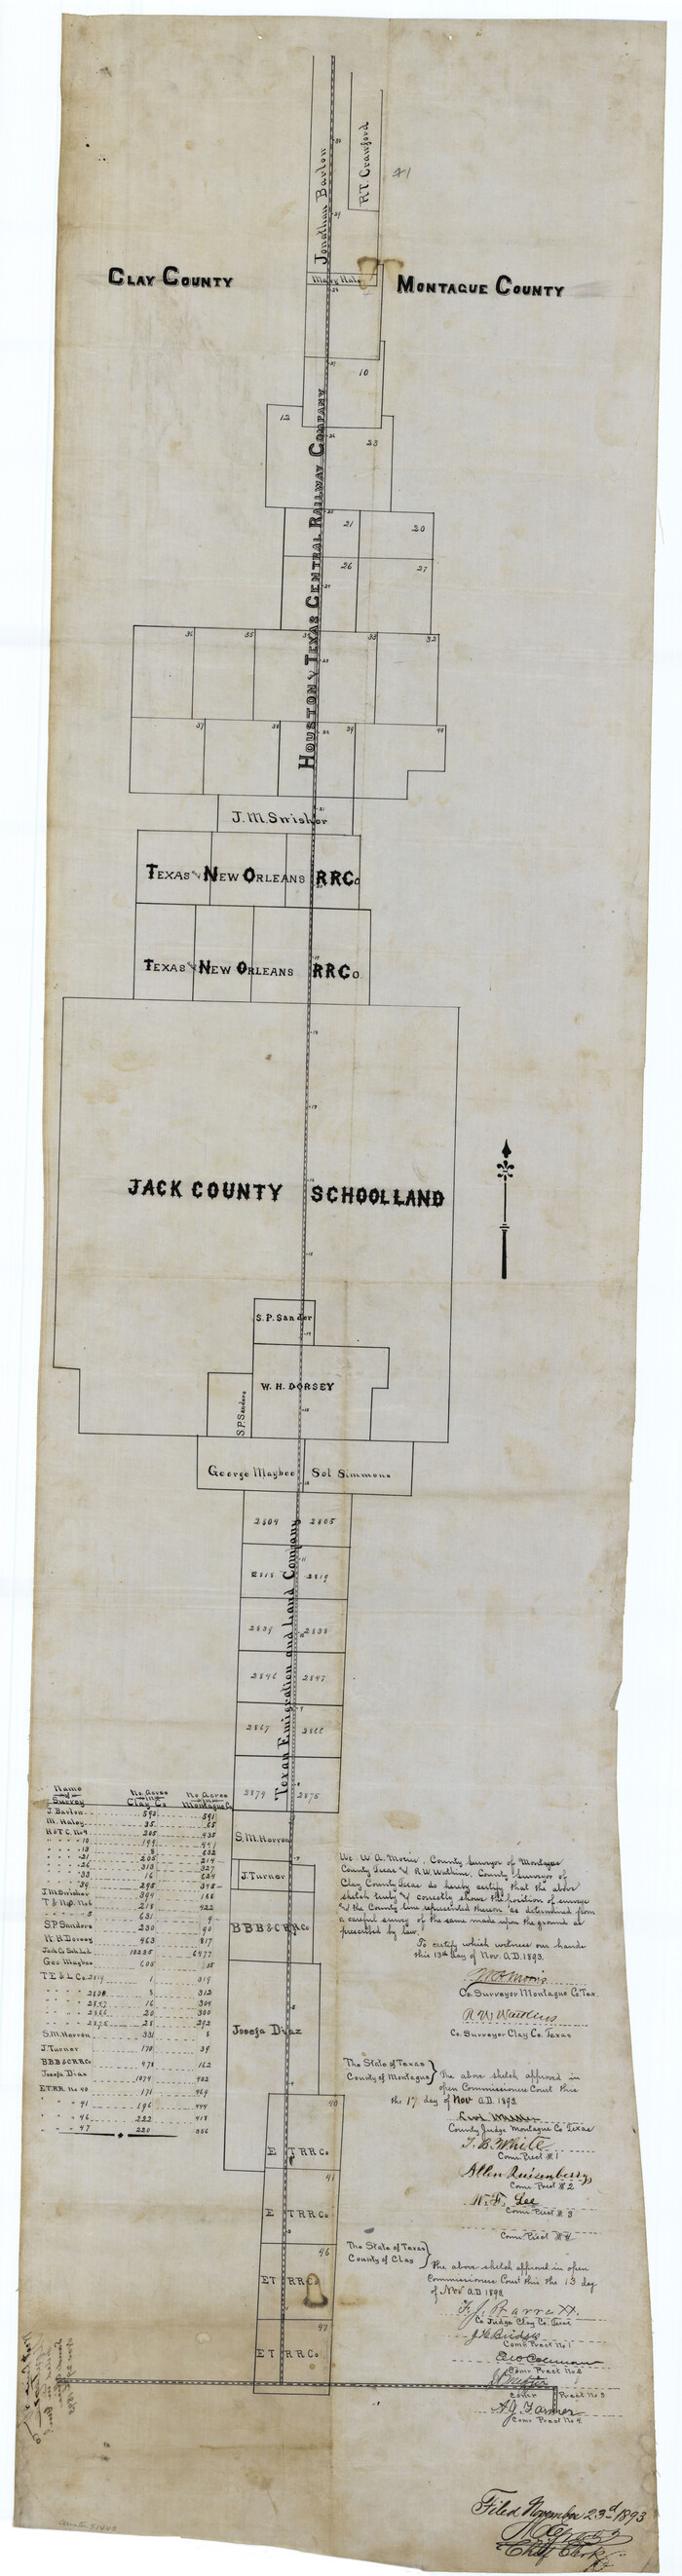 51443, Clay County Boundary File 18a, General Map Collection